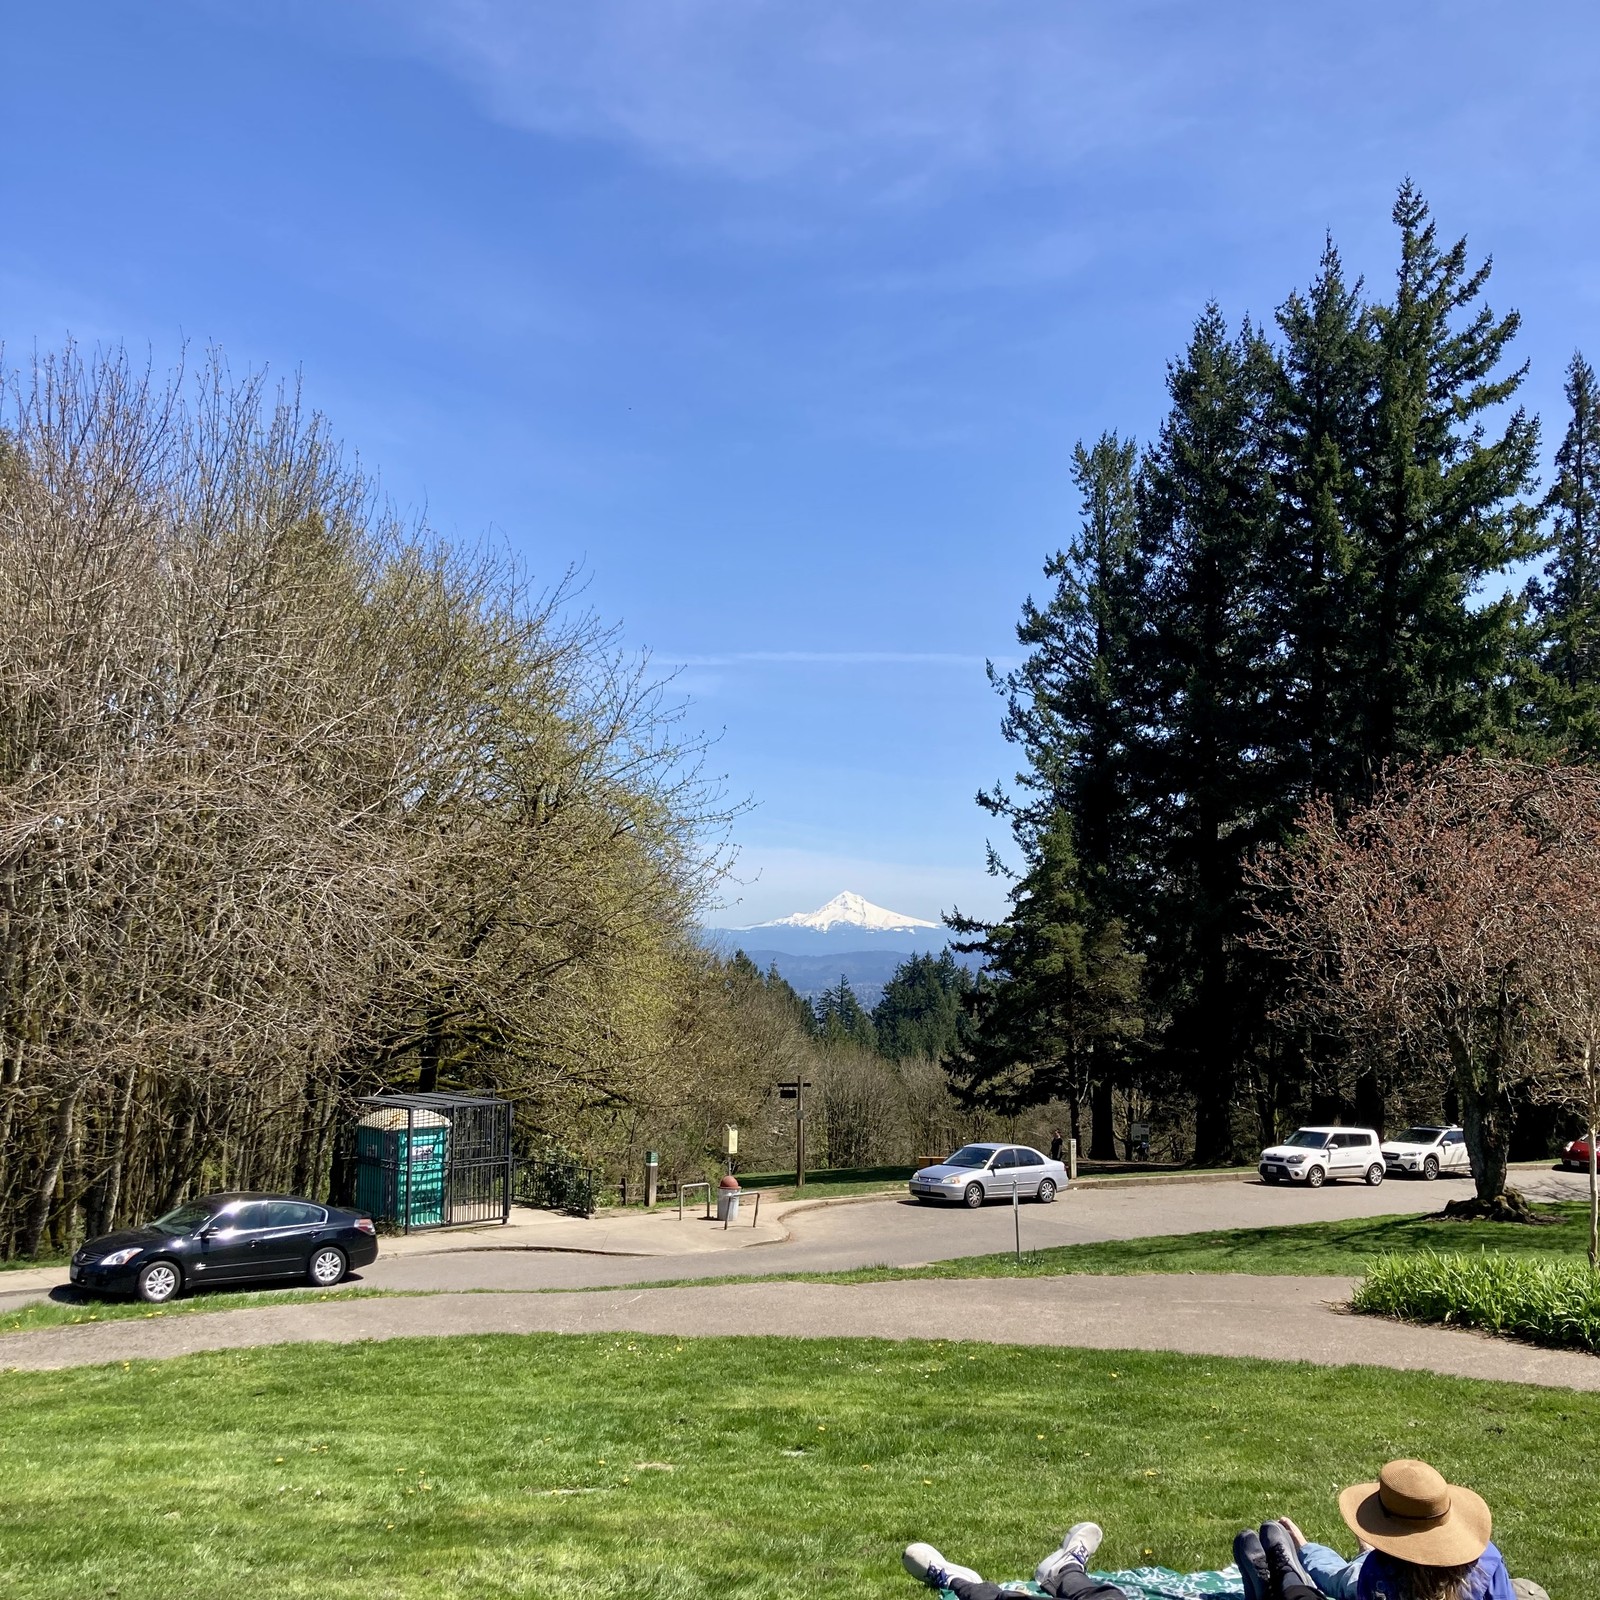 View toward Mt. Hood from Council Crest Park. Air is crystal clear, about 68°F. Mountain brilliant with a coat of snow. In the very near foreground, less than 15' away, are two people lying on the grass